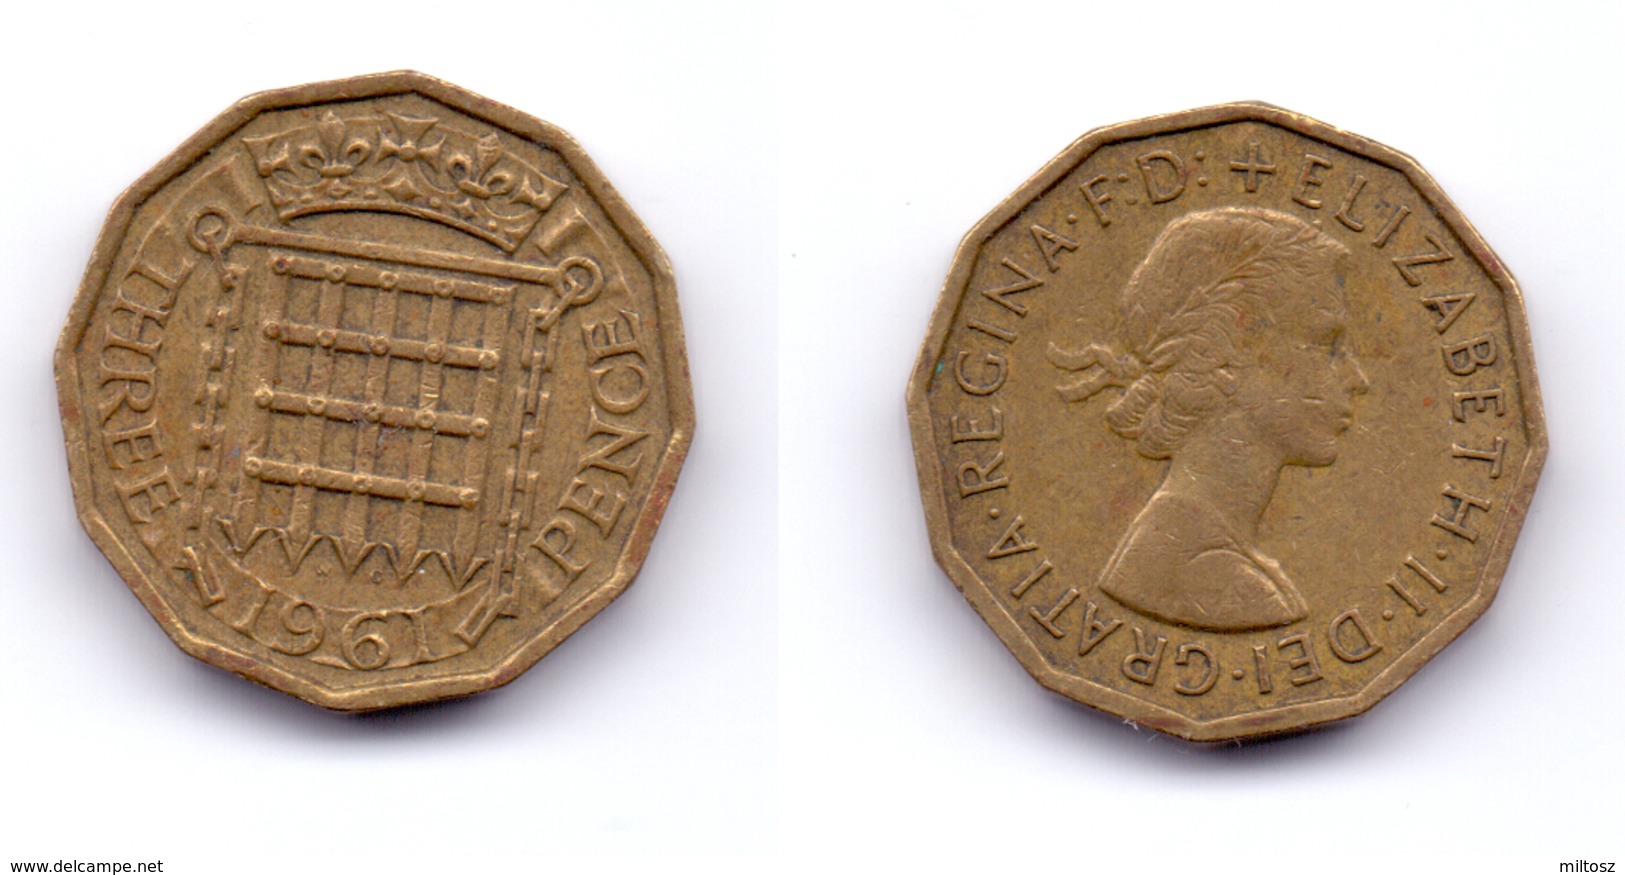 Great Britain 3 Pence 1961 - F. 3 Pence